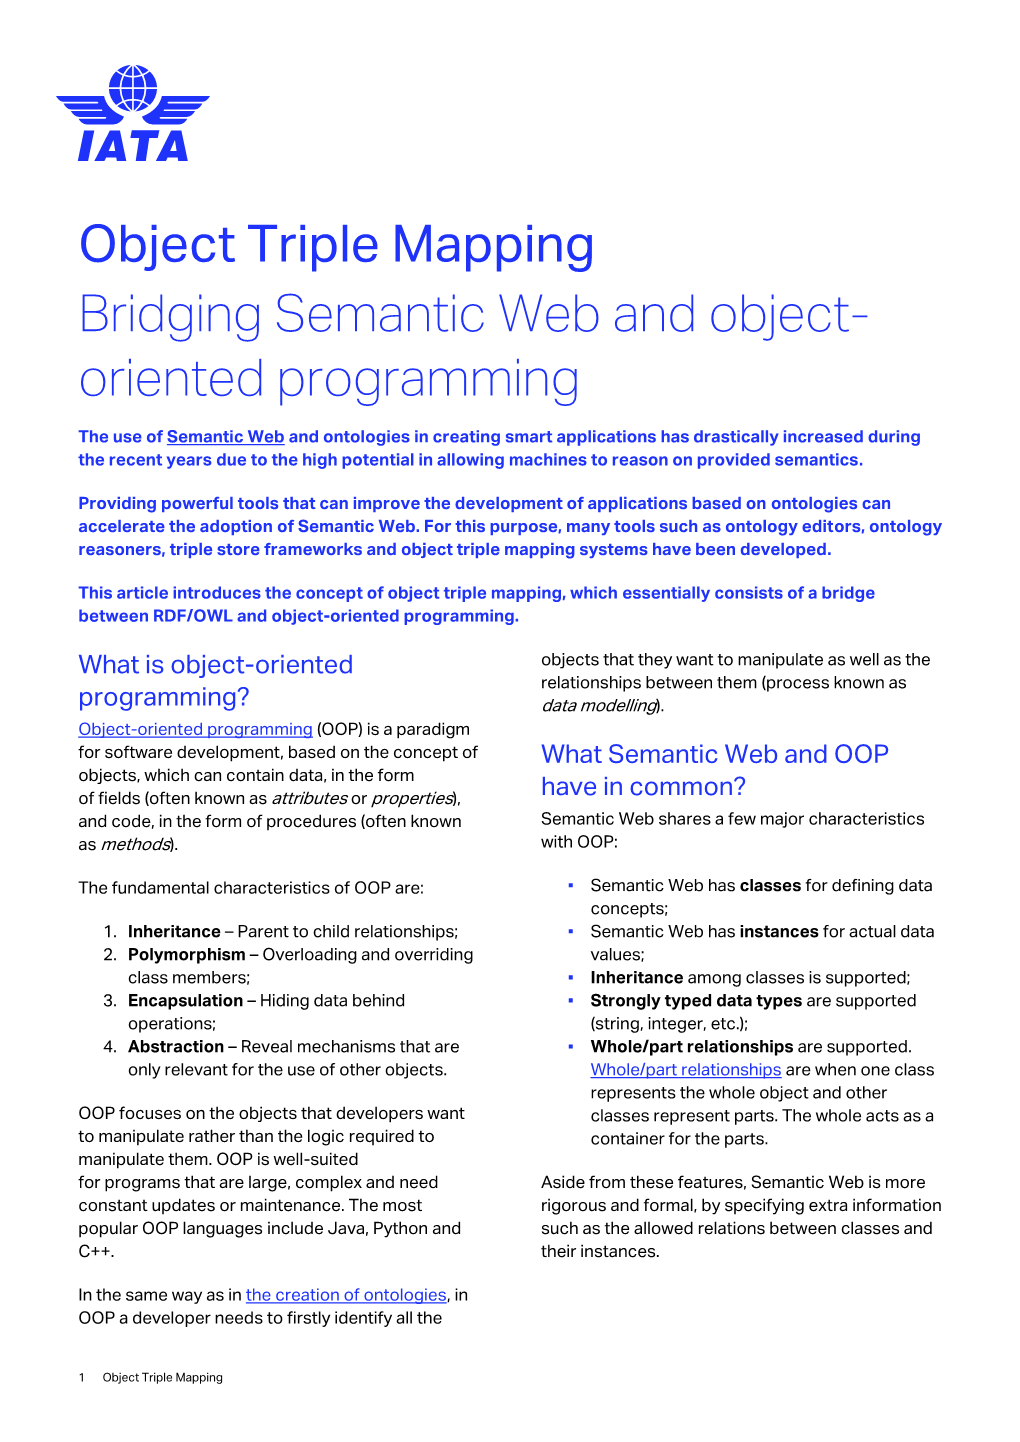 Object Triple Mapping Bridging Semantic Web and Object- Oriented Programming